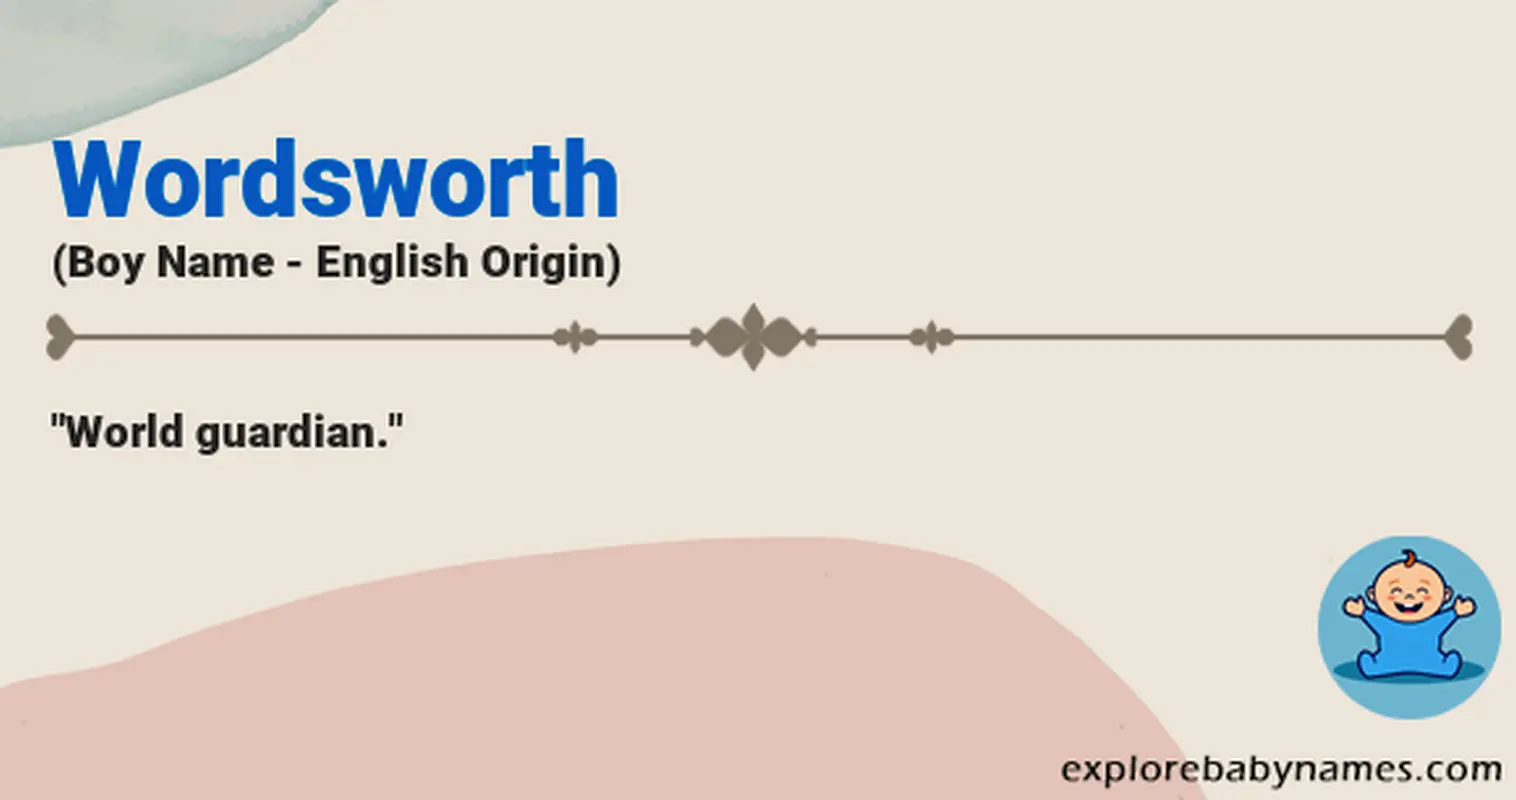 Meaning of Wordsworth